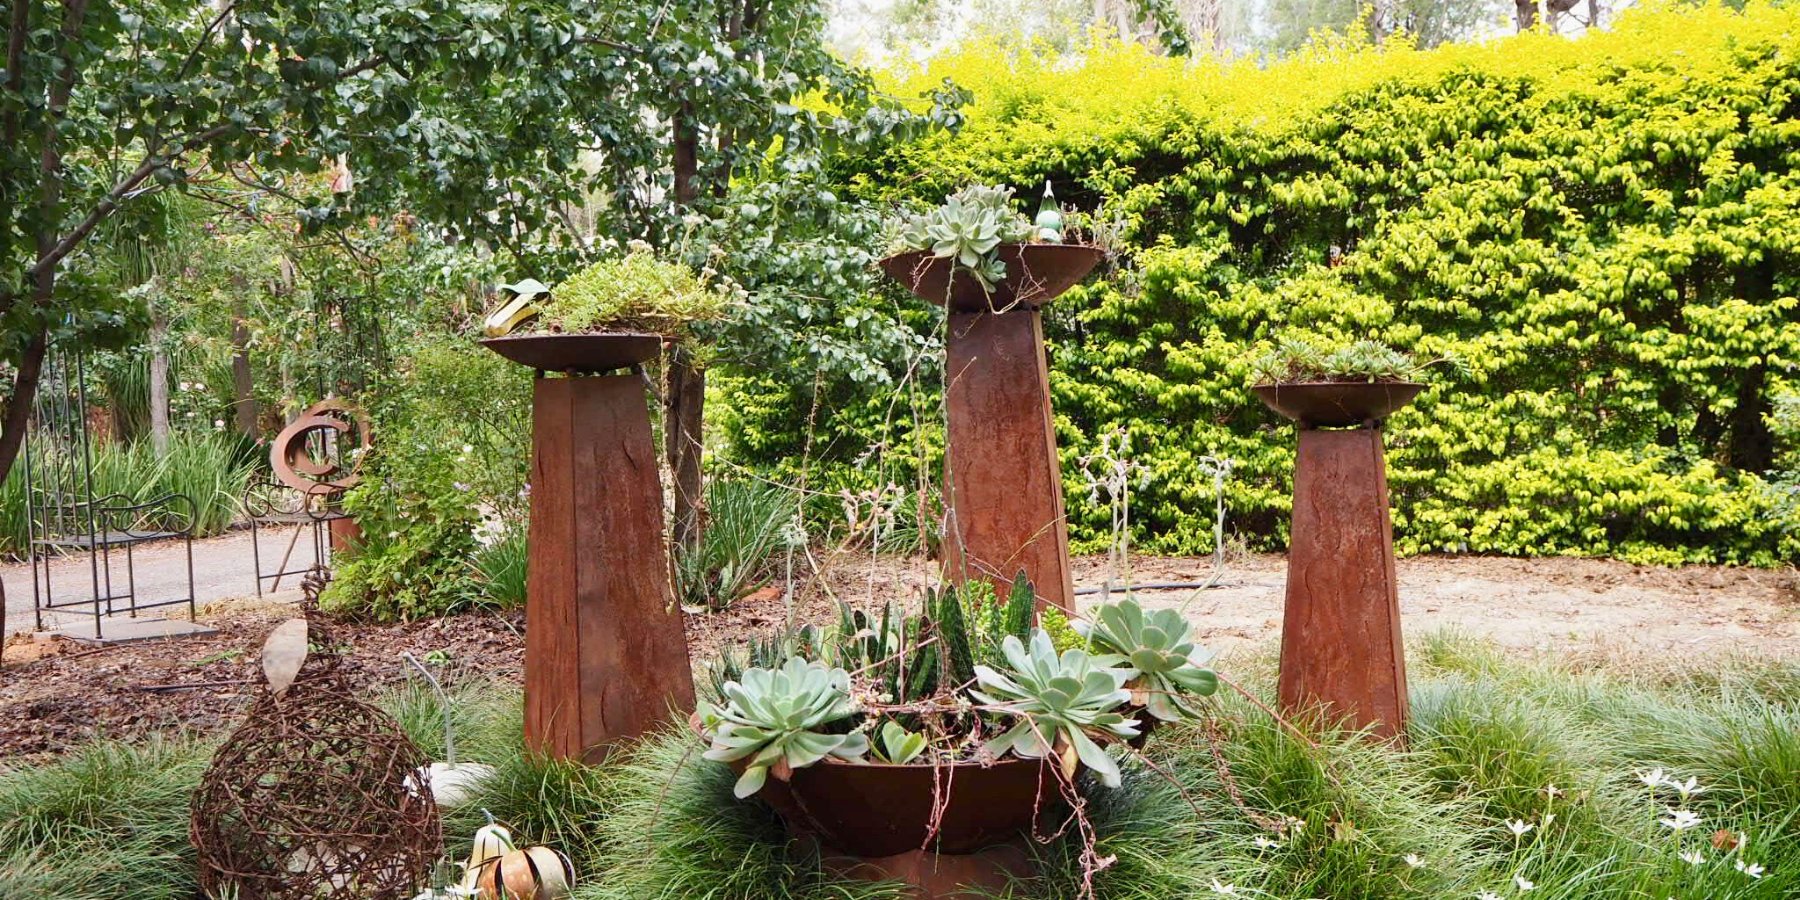   Installations, Statues and Rustic Garden Art